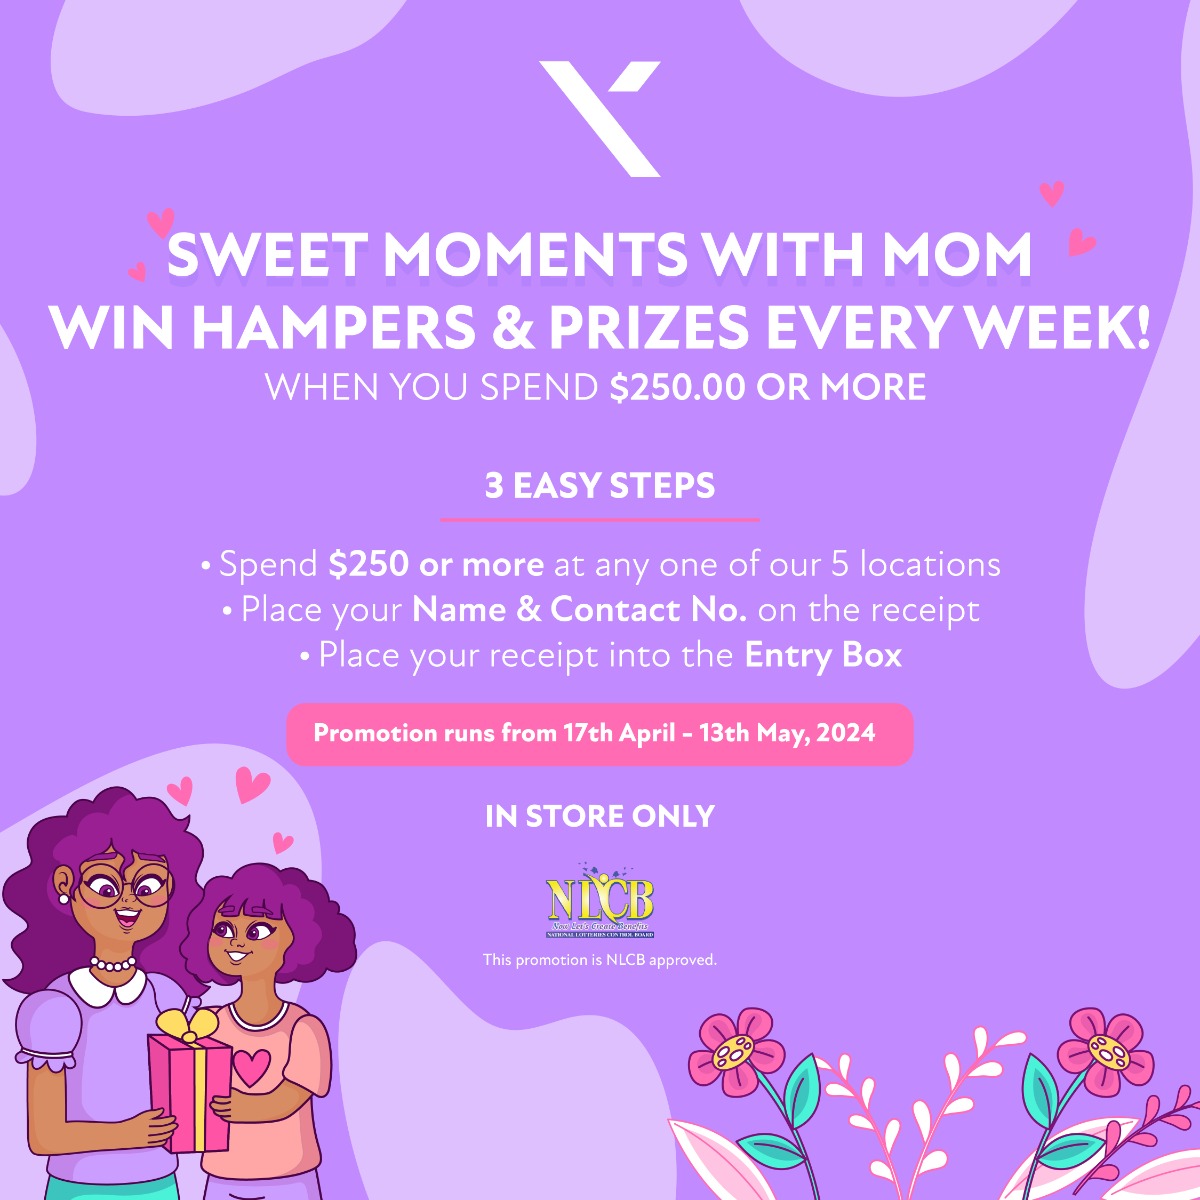 Sweet Moments with Mom Promotion | Excellent Stores | Trinidad